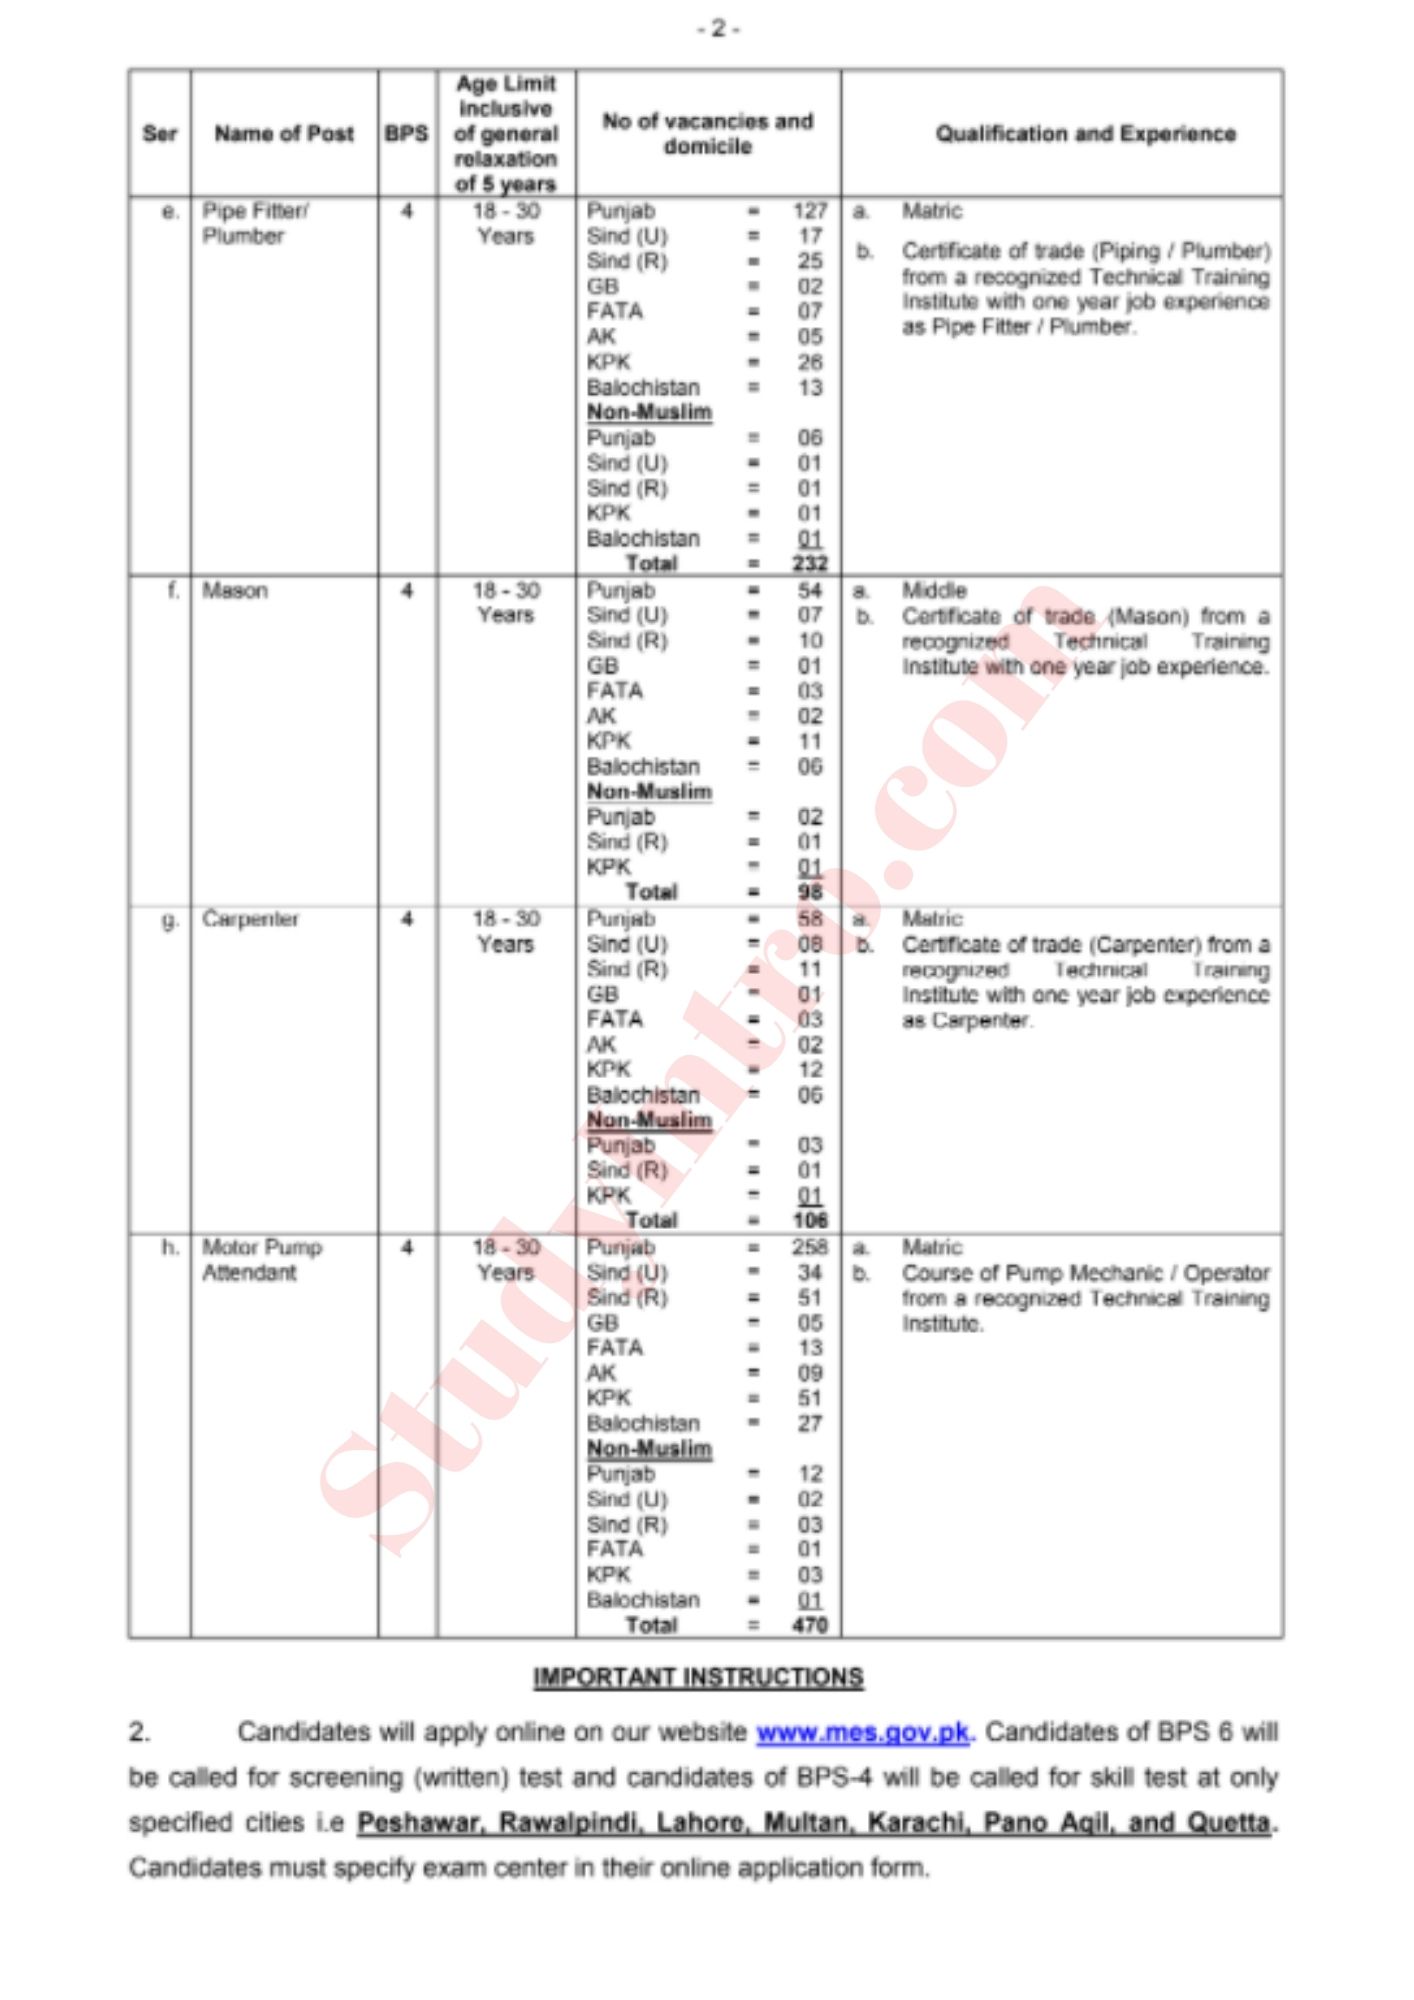 Jobs Opportunities in Military Engineer Services 2021